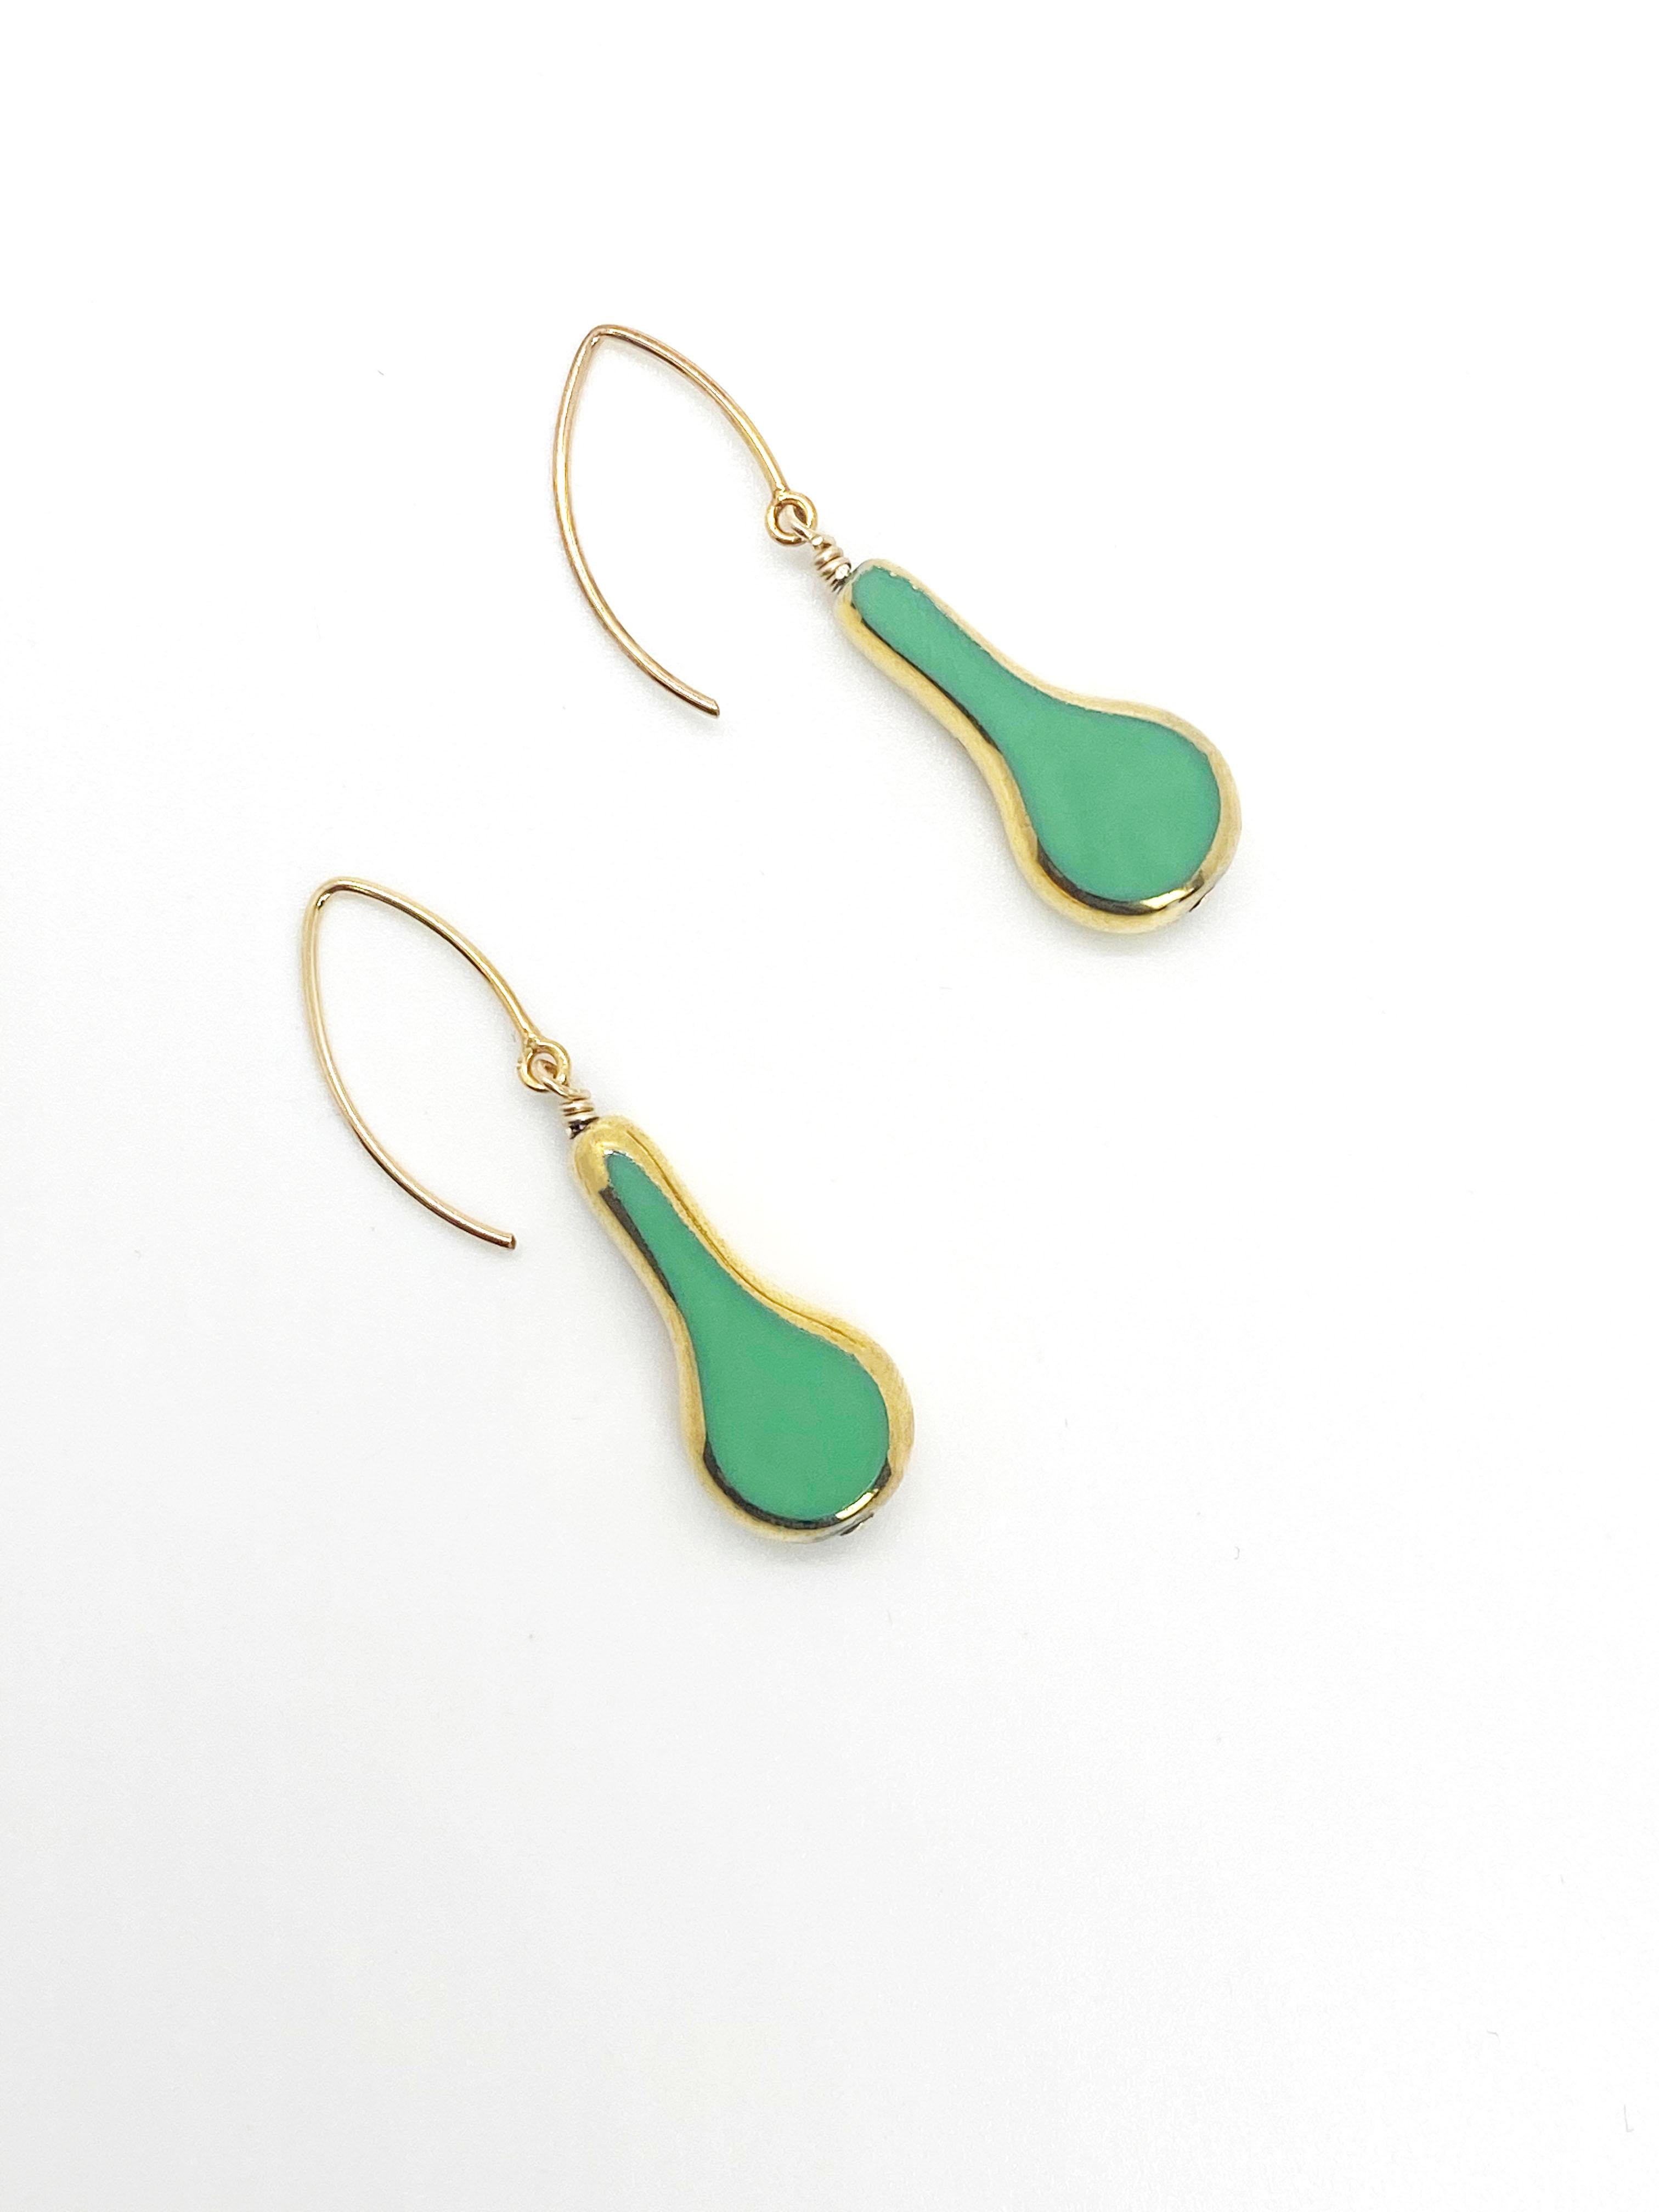 Something simple, fun annd different. This green banjo earrings are it. They are German vintage glass beads that are framed with 24K gold along with gold filled metal ear wires.

The vintage German glass beads were hand pressed during the 1920s-